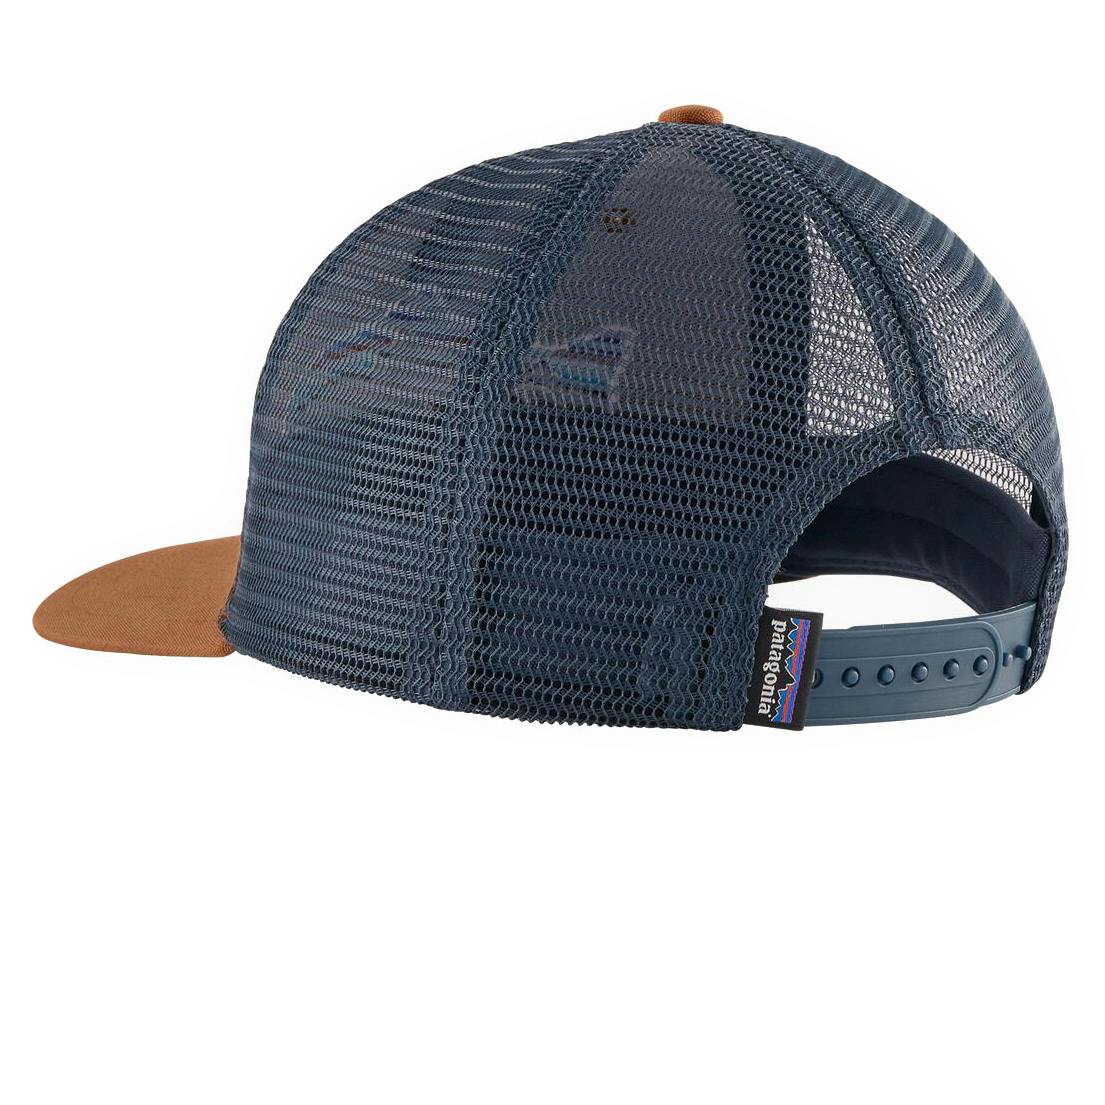 Patagonia Fitz Roy Trout Trucker Hat - Classic Navy, Gifts